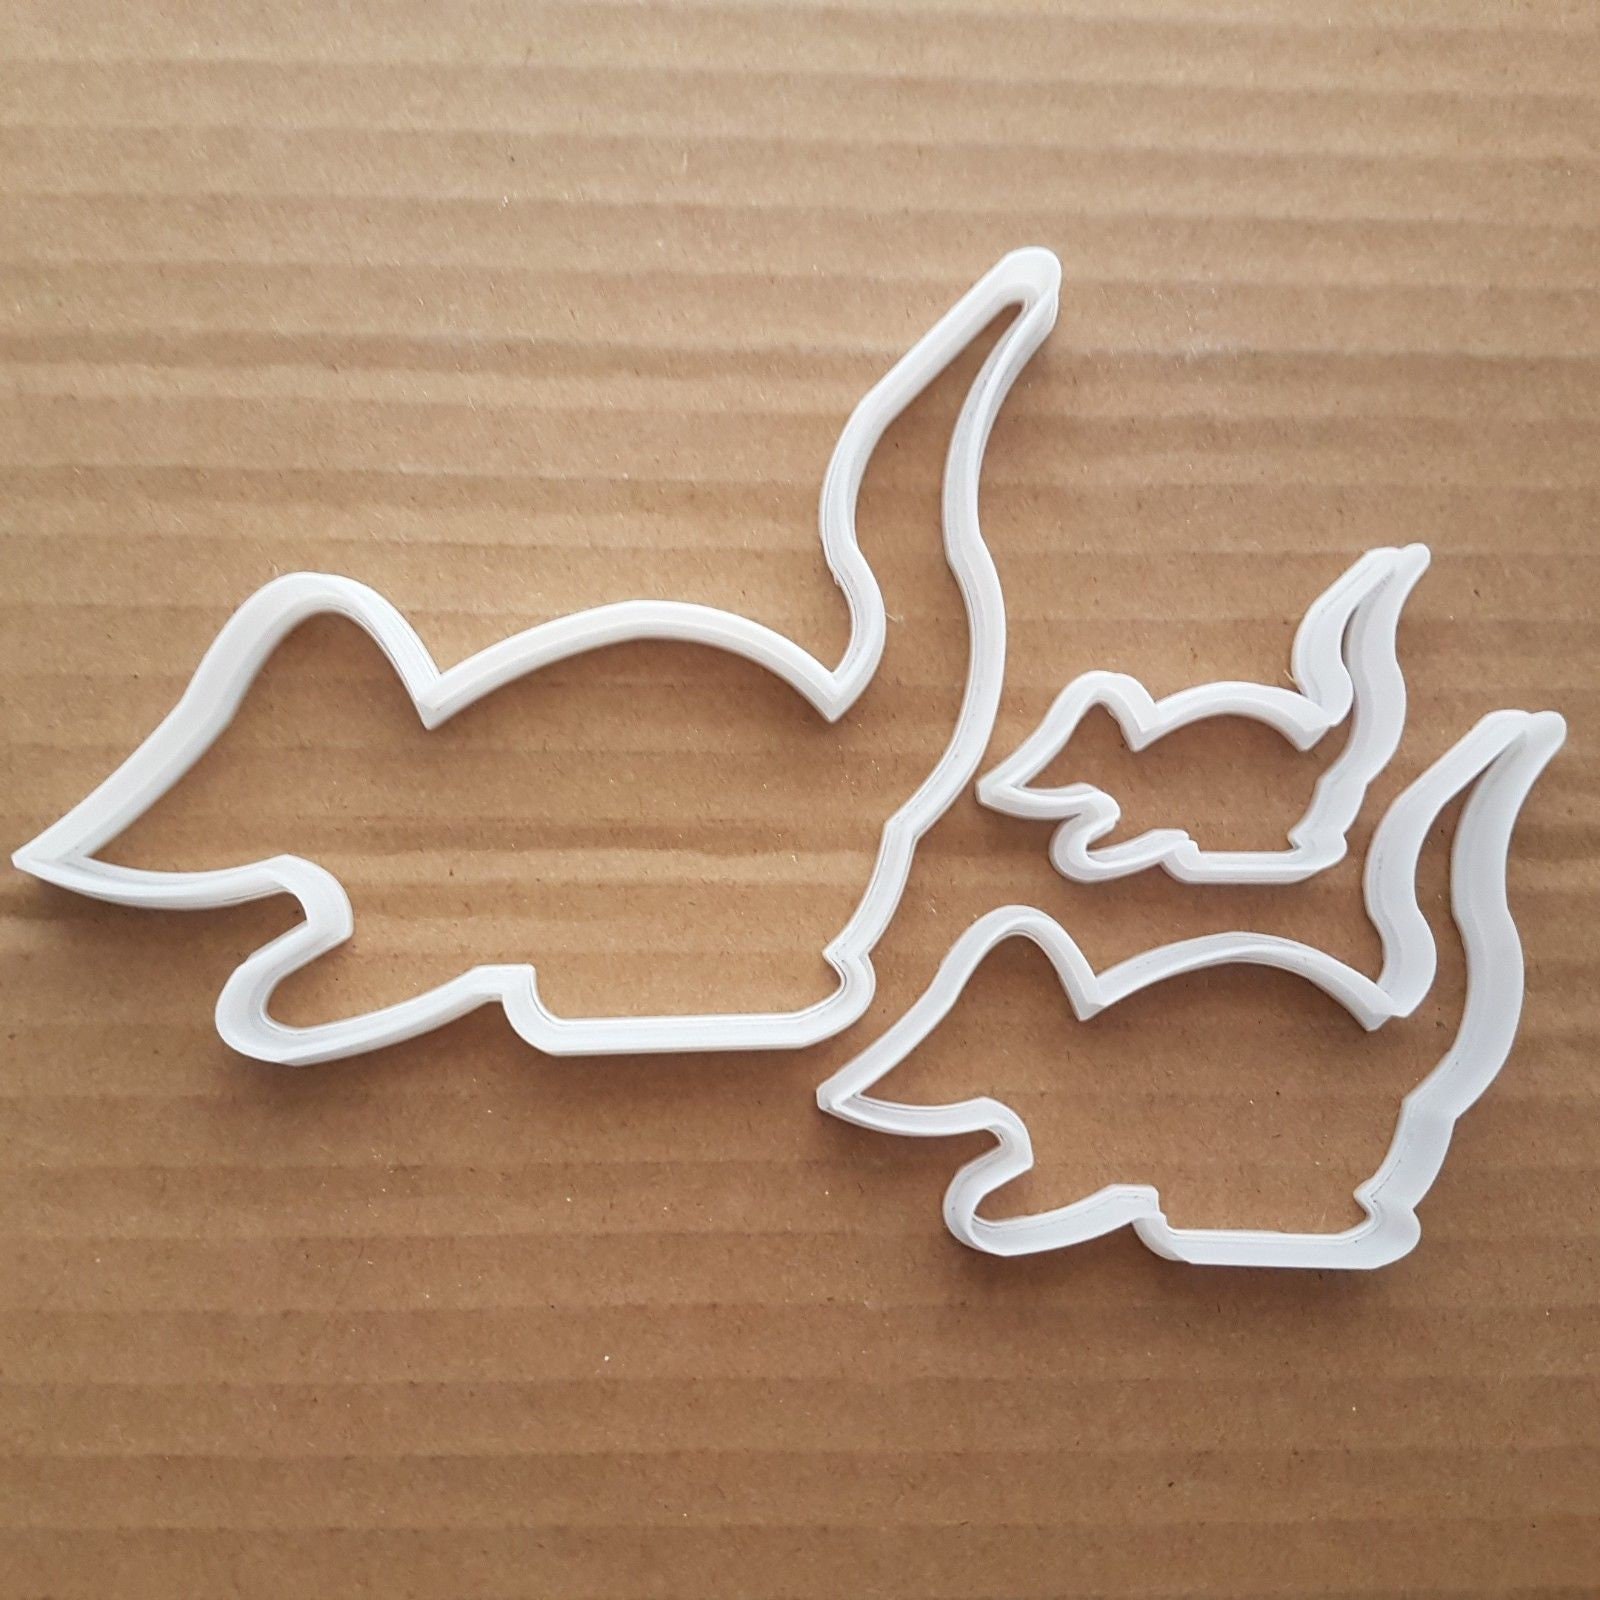 Rat Mouse Cookie Pastry Biscuit Cutter Icing Fondant Baking Bake Kitchen Pest